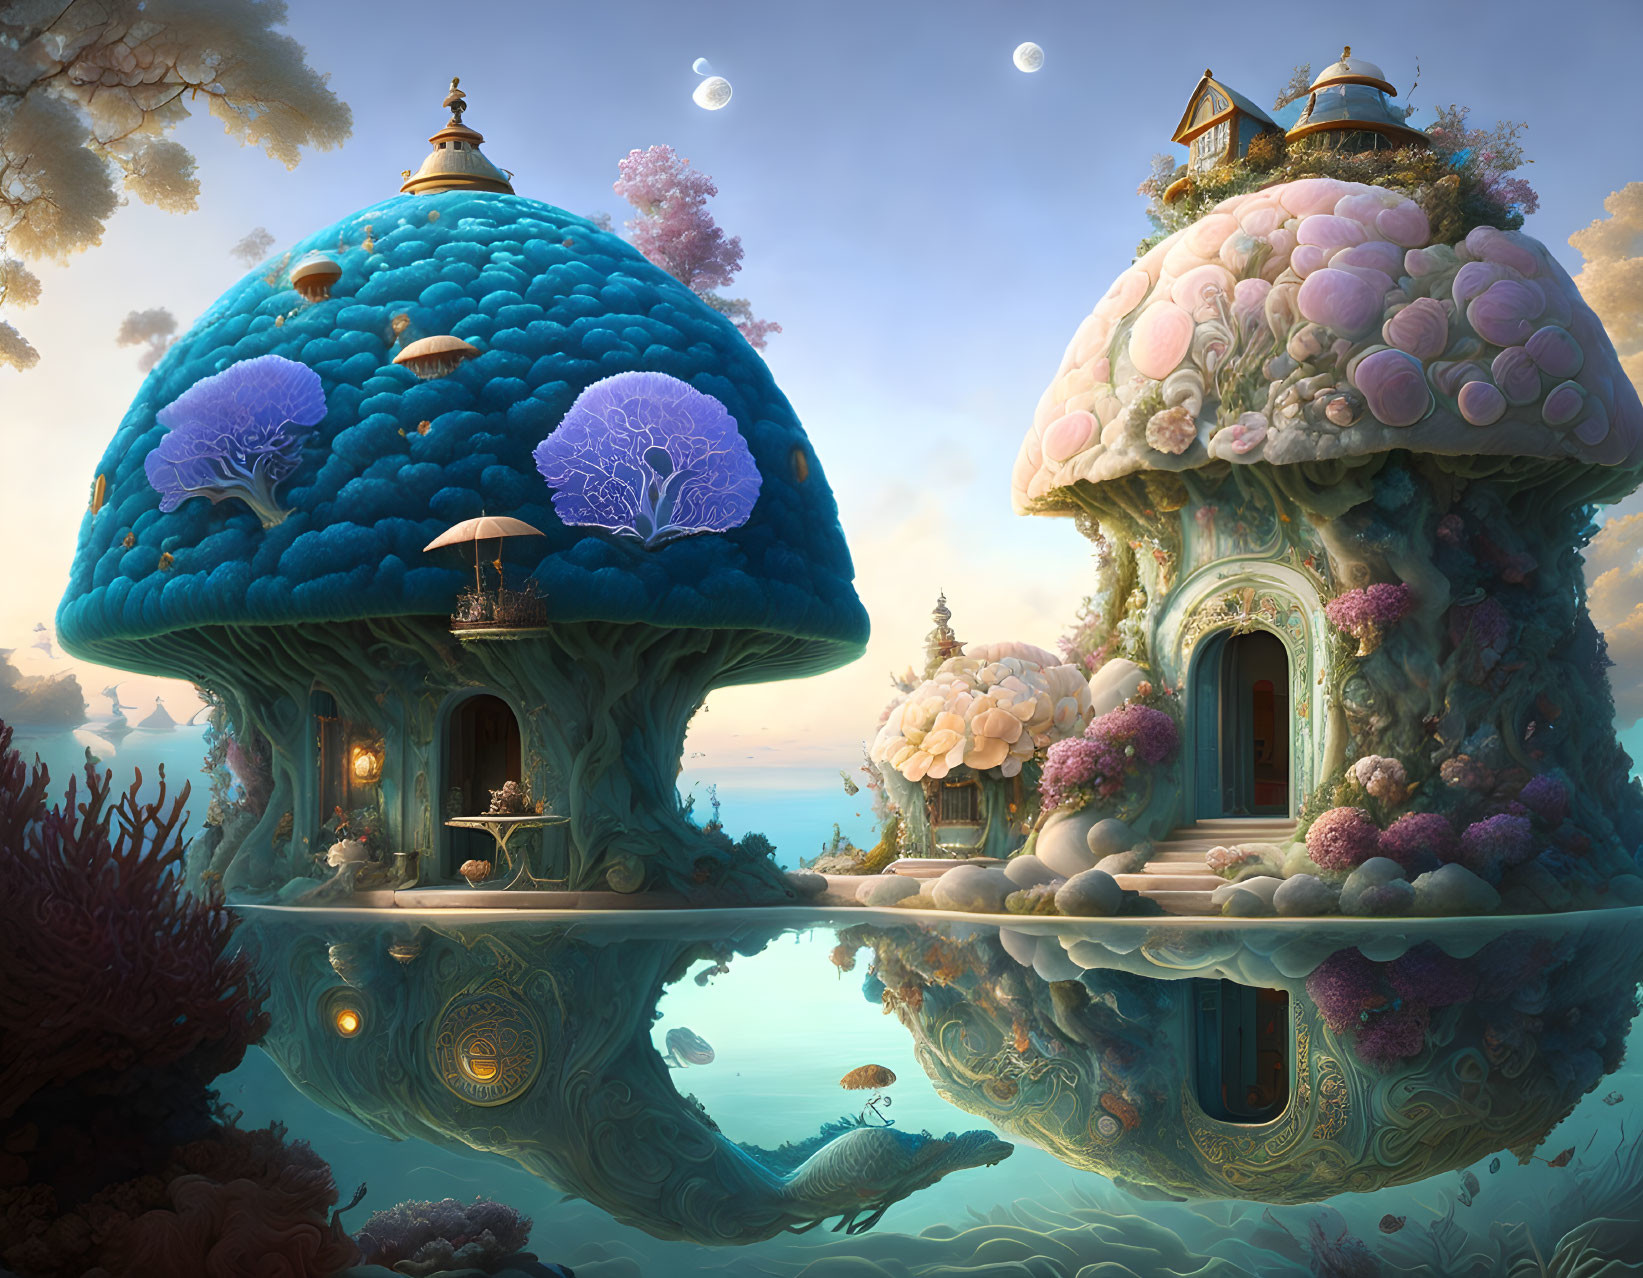 Whimsical mushroom houses by reflective water with floating moons